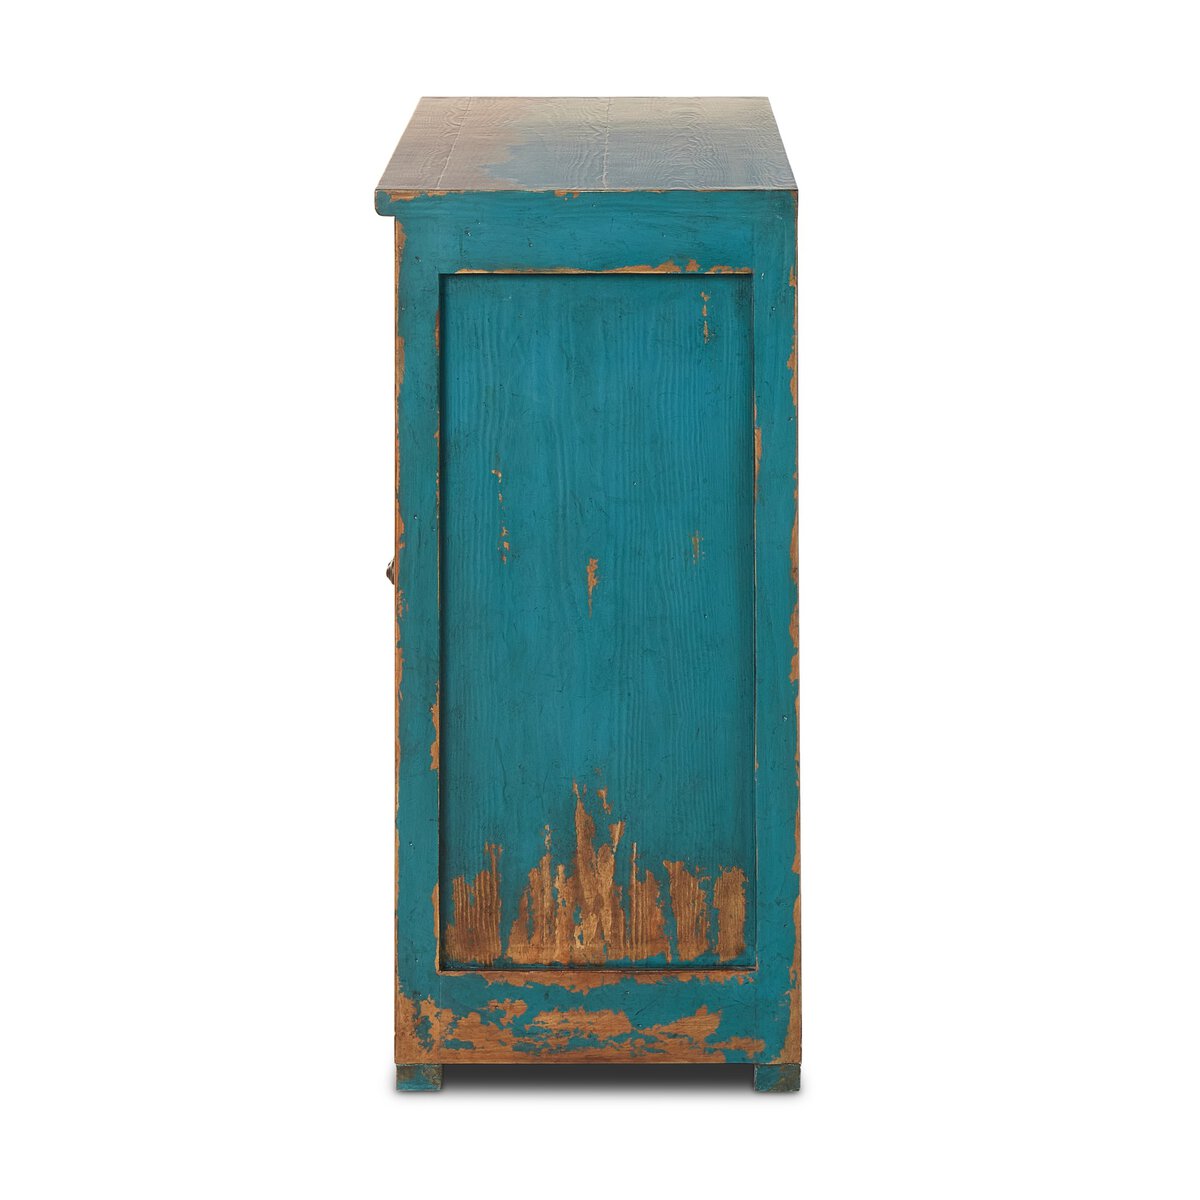 It Takes An Hour Sideboard 63" Distressed Blue